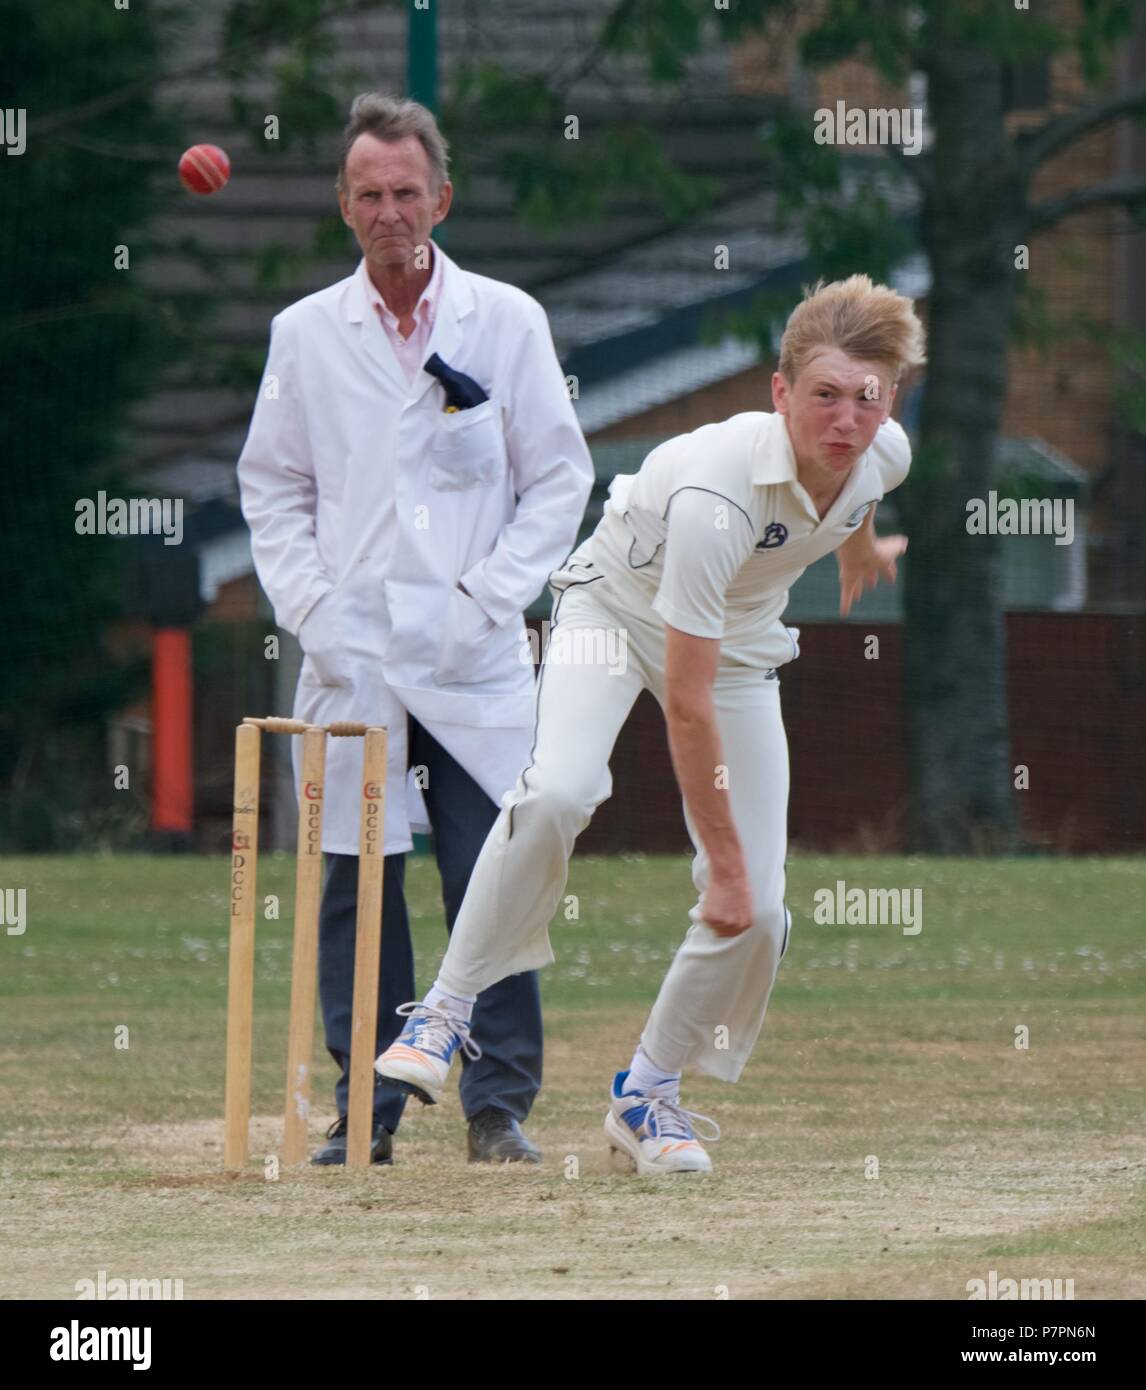 A fast bowler in action. Stock Photo